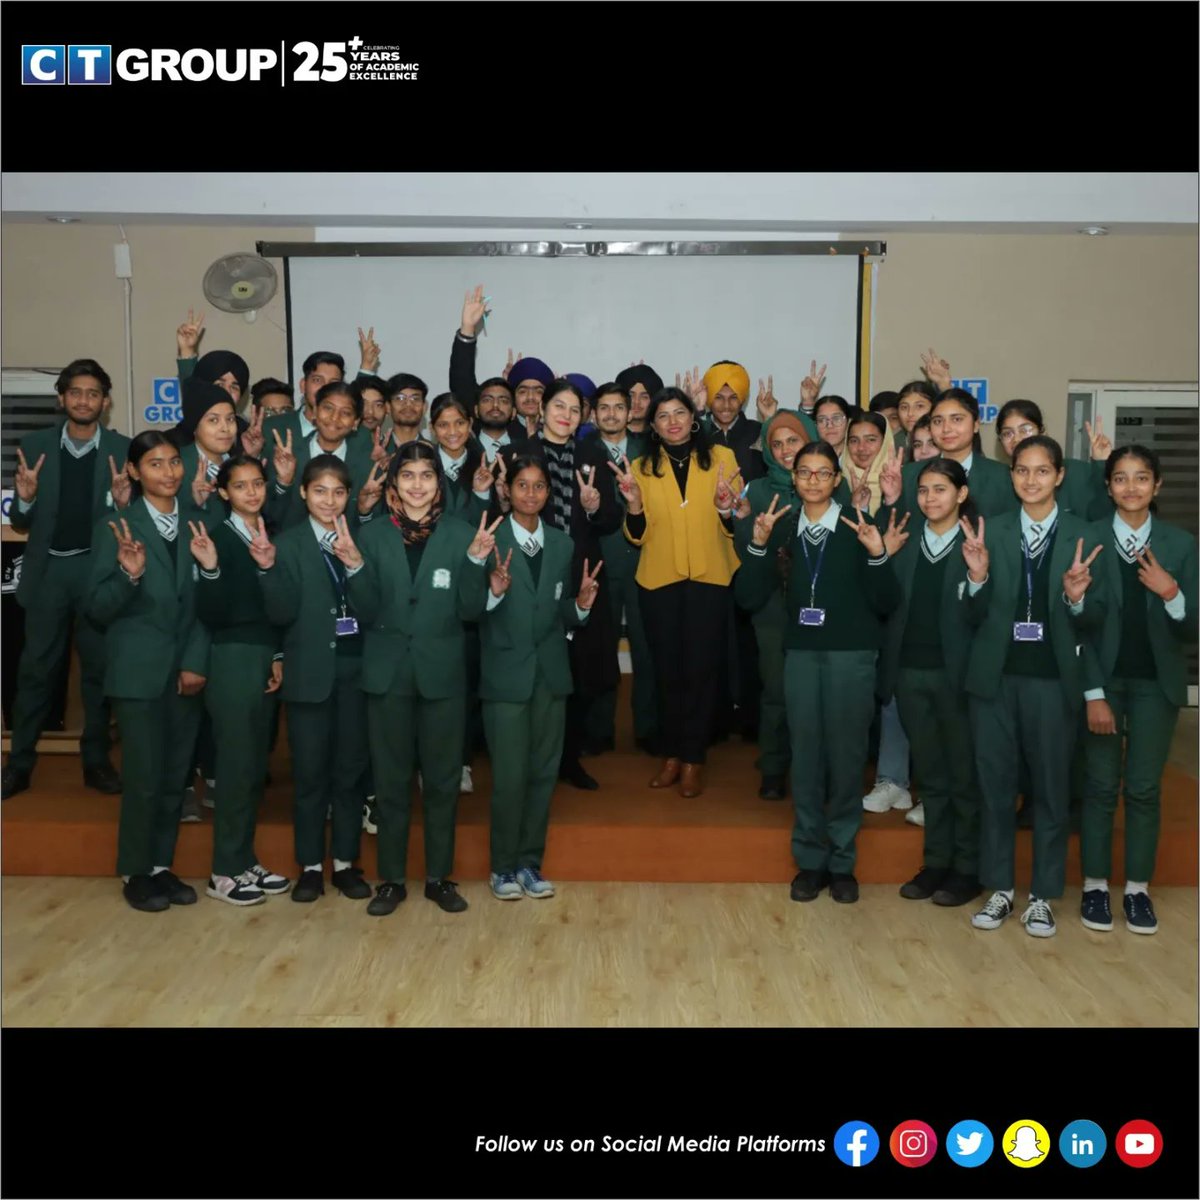 We take care of our students, which is why we organized a stress reliever session to bid goodbye to exam stress. 

Led by Monika Singh, Head Counsellor, CT Group, the session was hosted by CTIHS Senior Secondary Wing.

#ctgroup #shahpur #southcampus #examstress